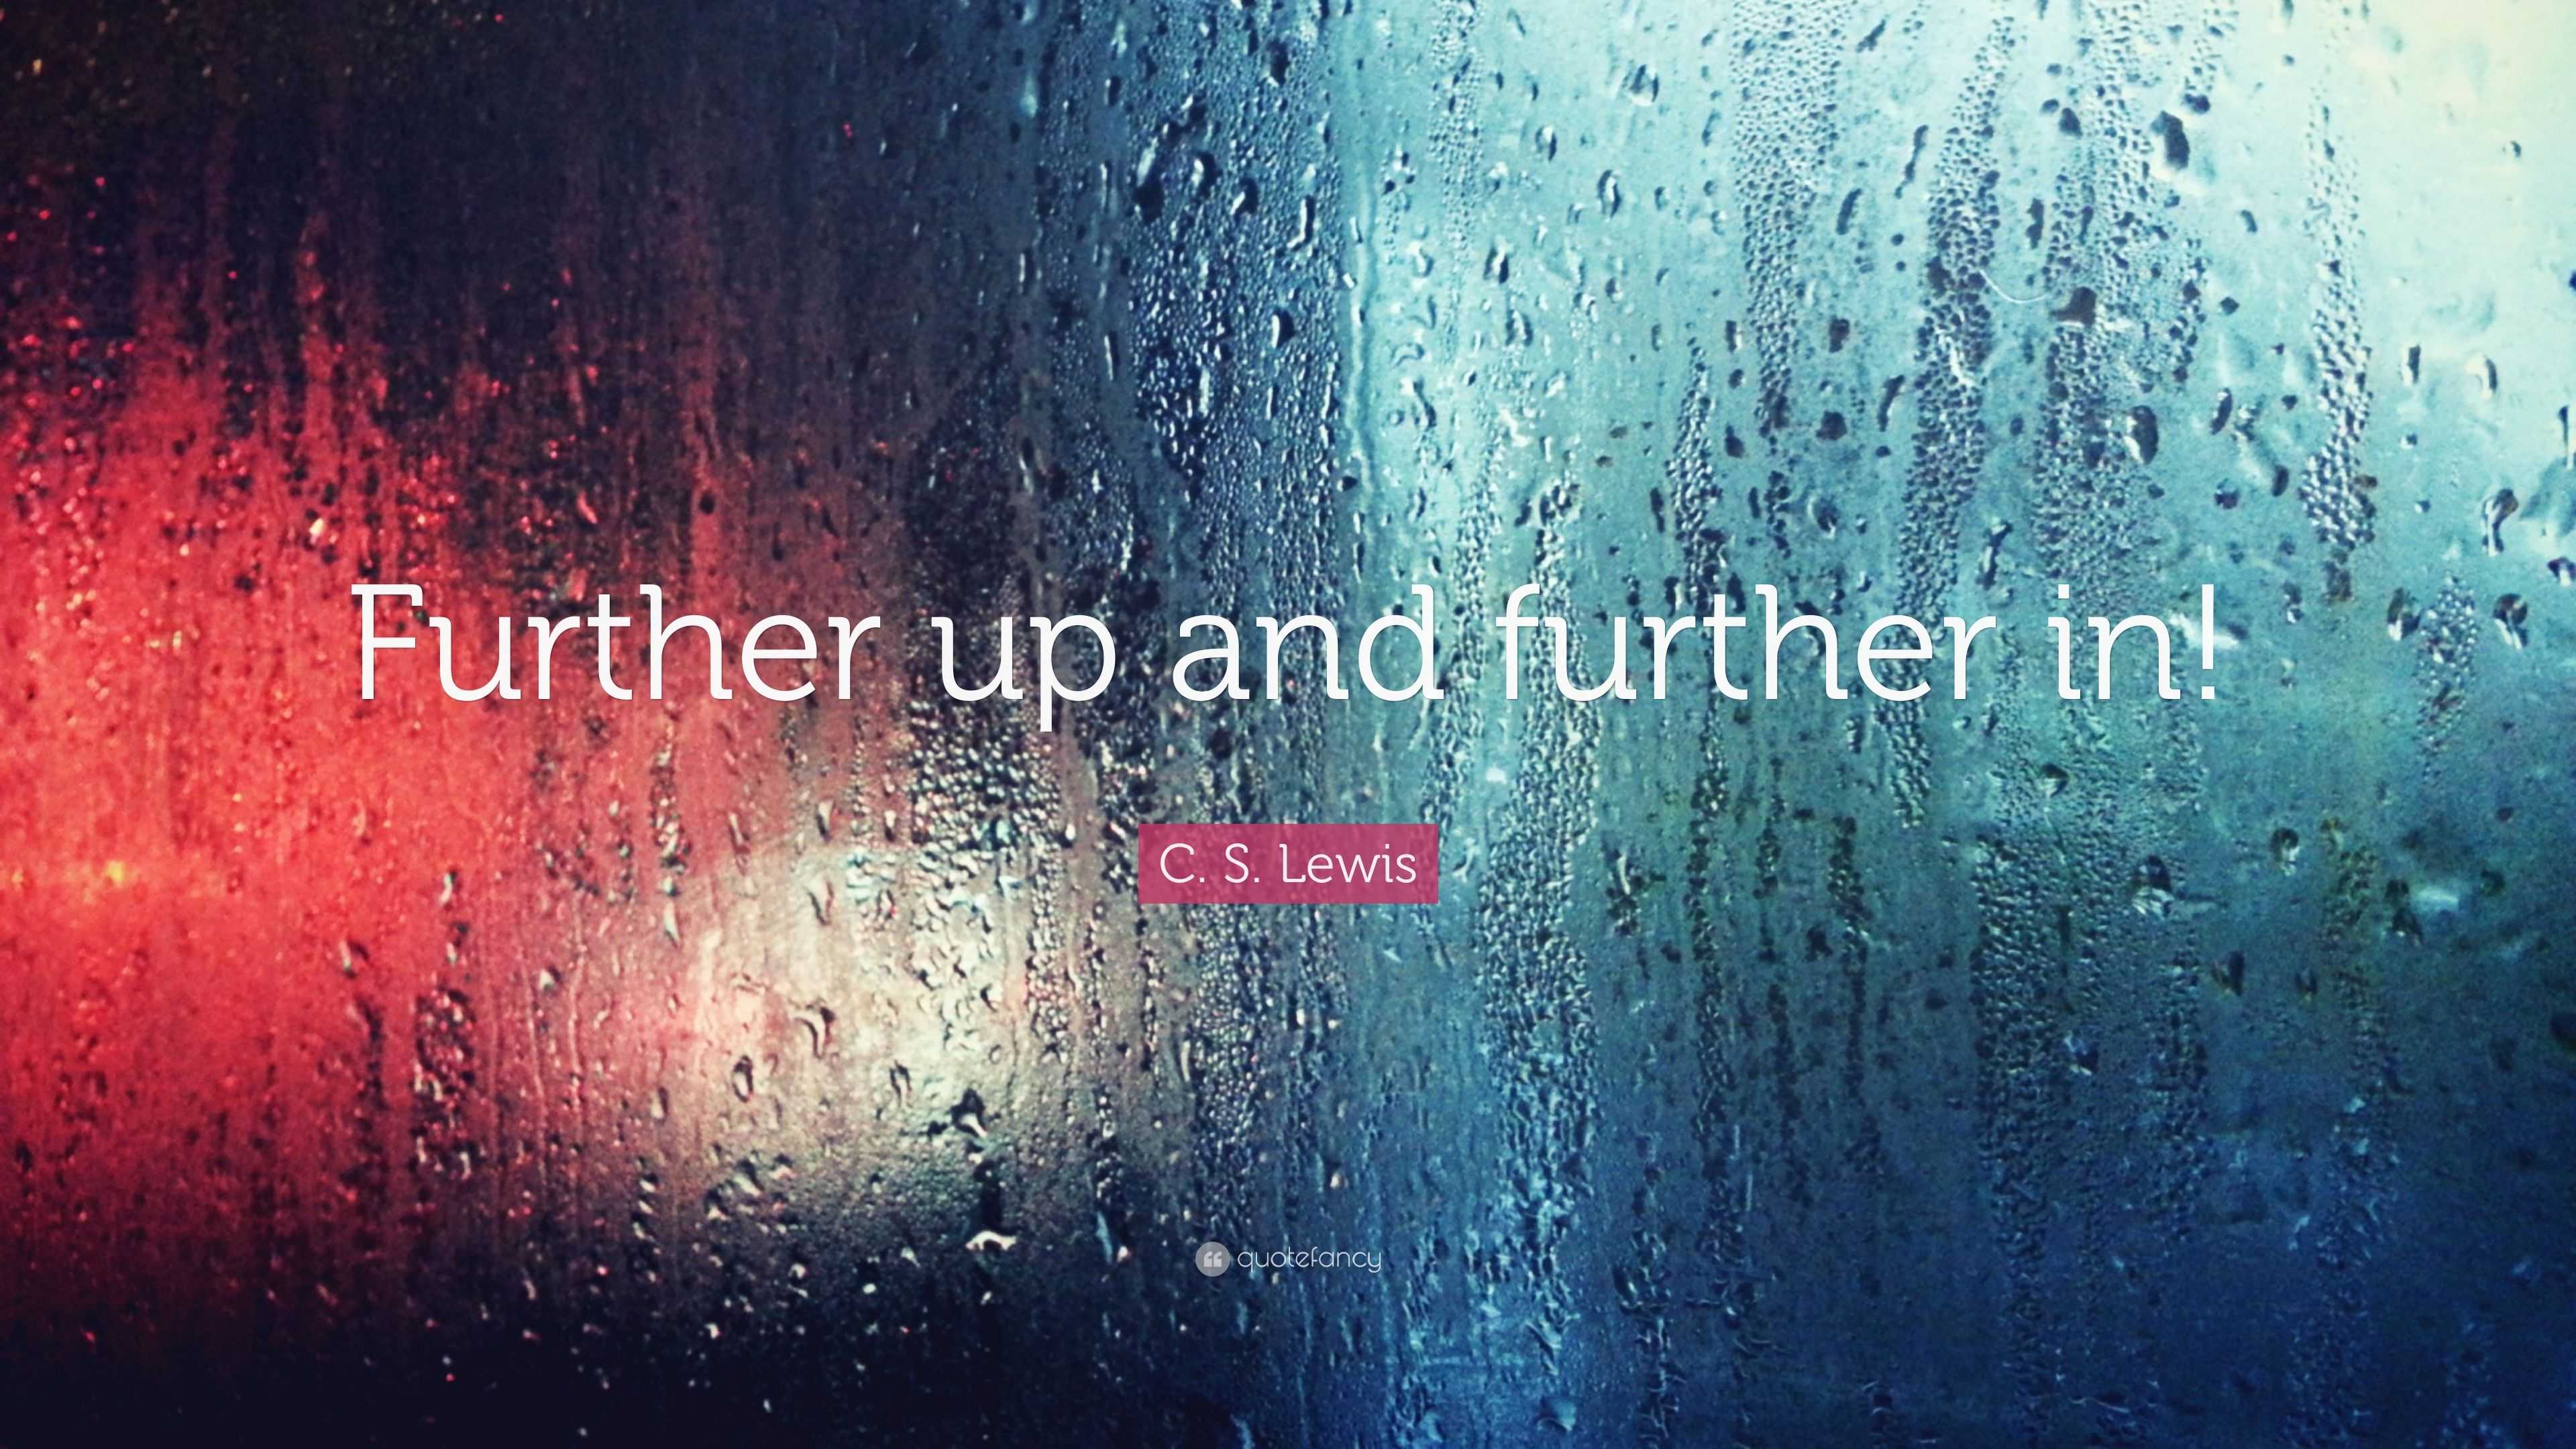 C. S. Lewis Quote: “Further up and further in!” (7 wallpapers) - Quotefancy